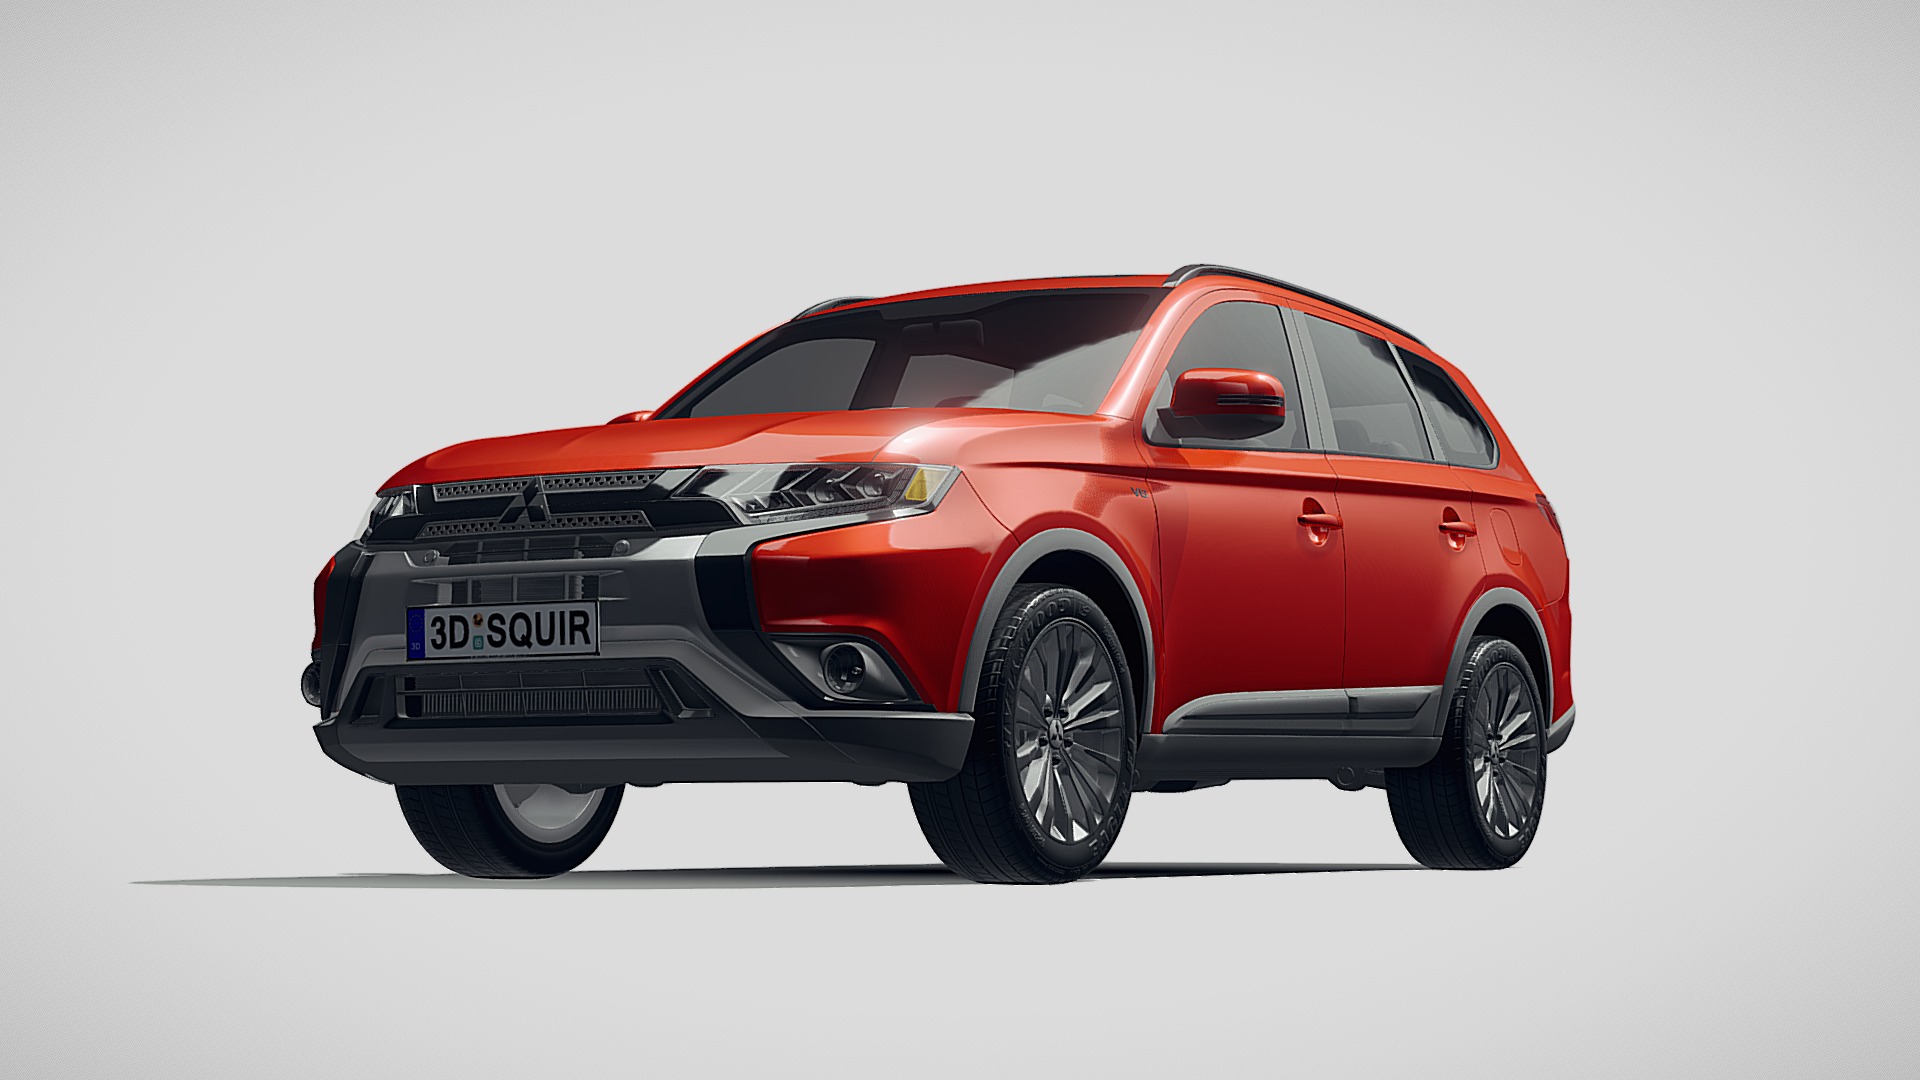 3D model Mitsubishi Outlander 2019 - This is a 3D model of the Mitsubishi Outlander 2019. The 3D model is about a red car with a white background.